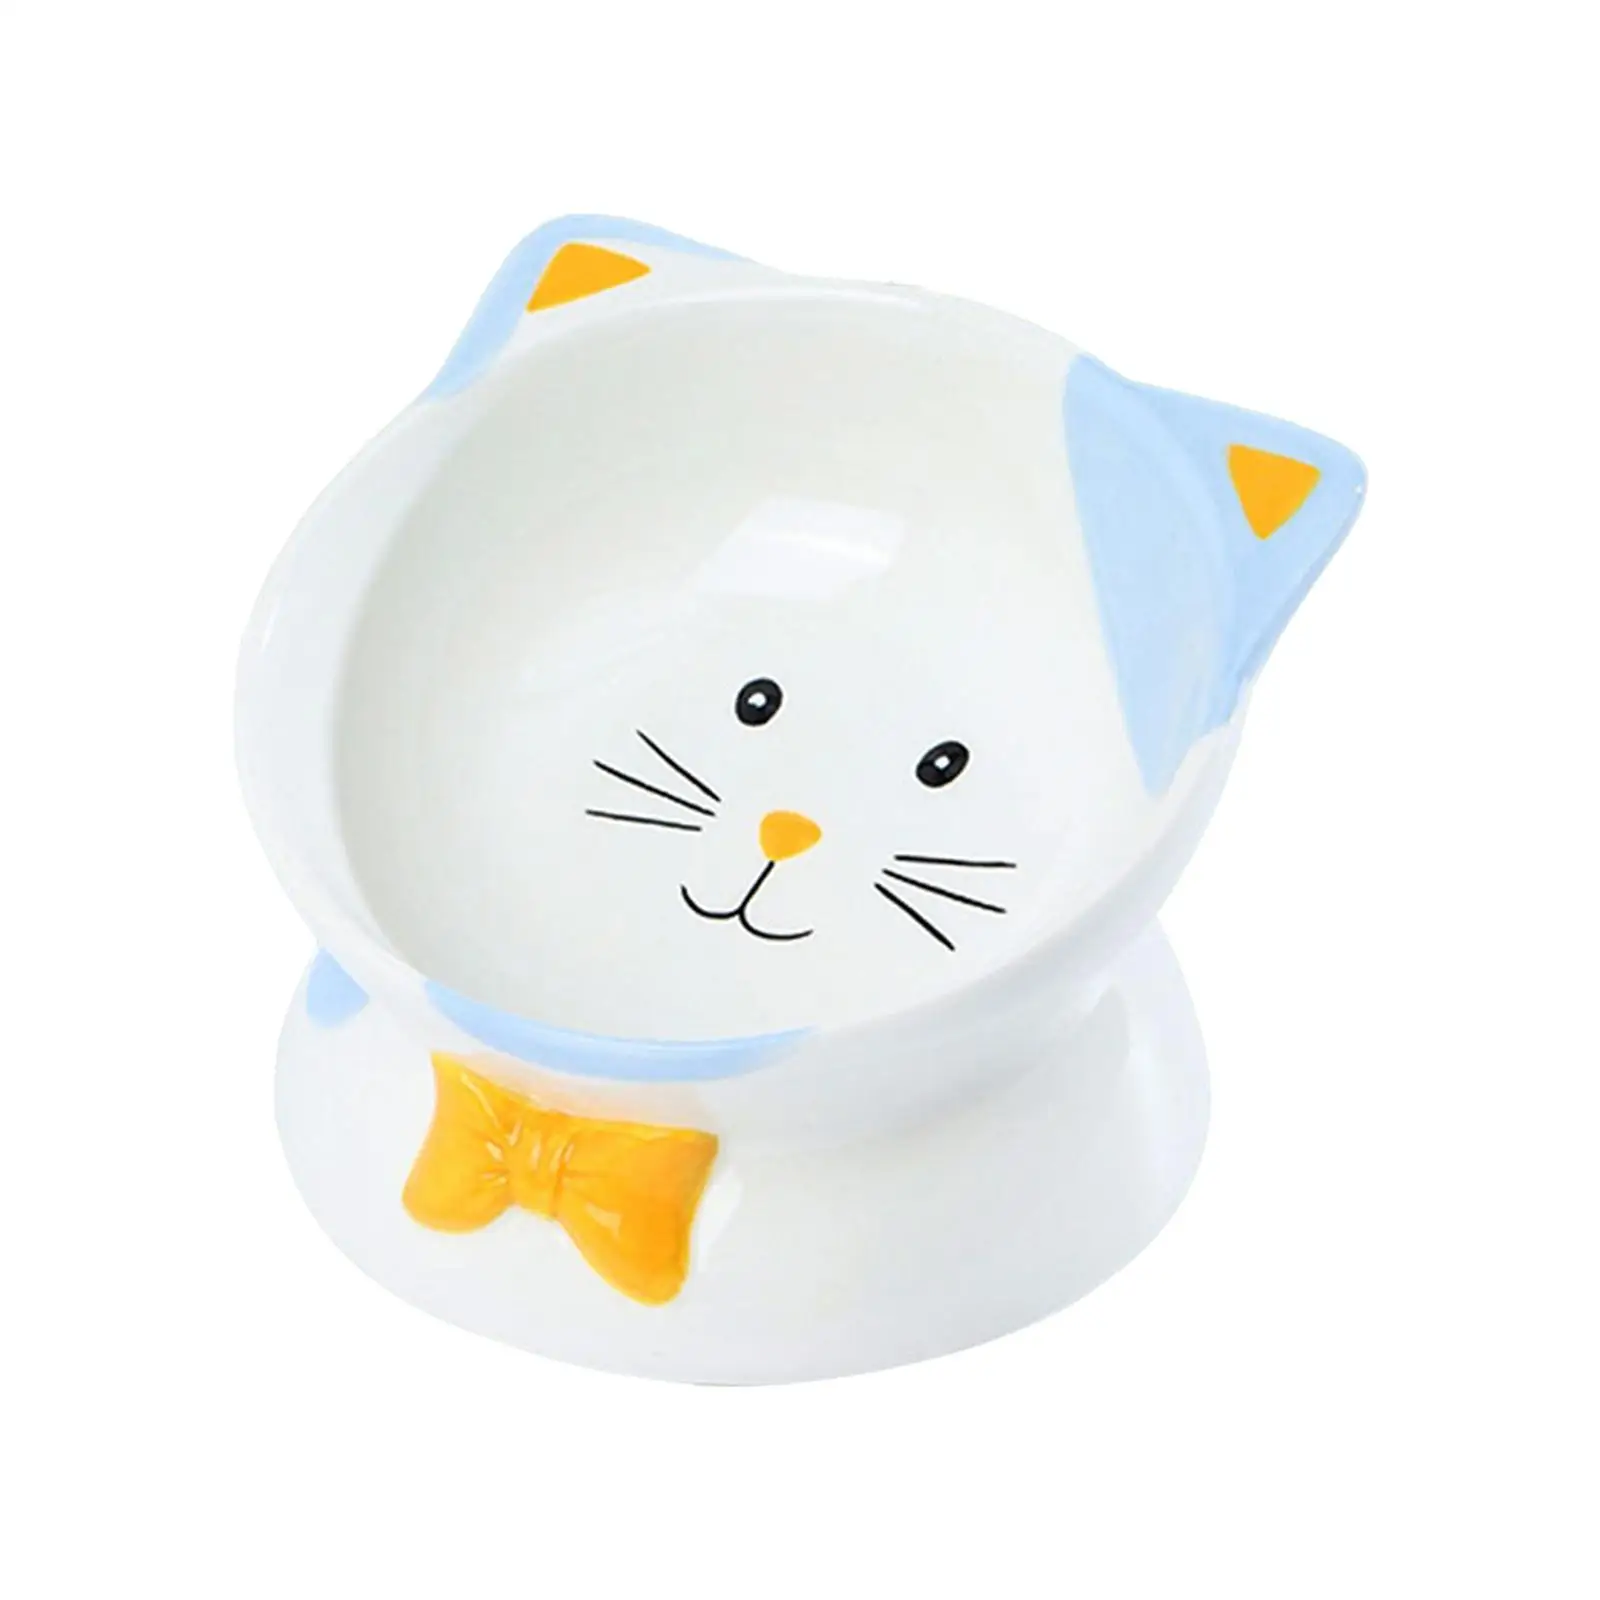 

Elevated Cat Food Bowl Drinking Feeding Bowl Non Slip Water Bowl Ceramic Raised Tilted Feeder for Puppy Kitten Accessories